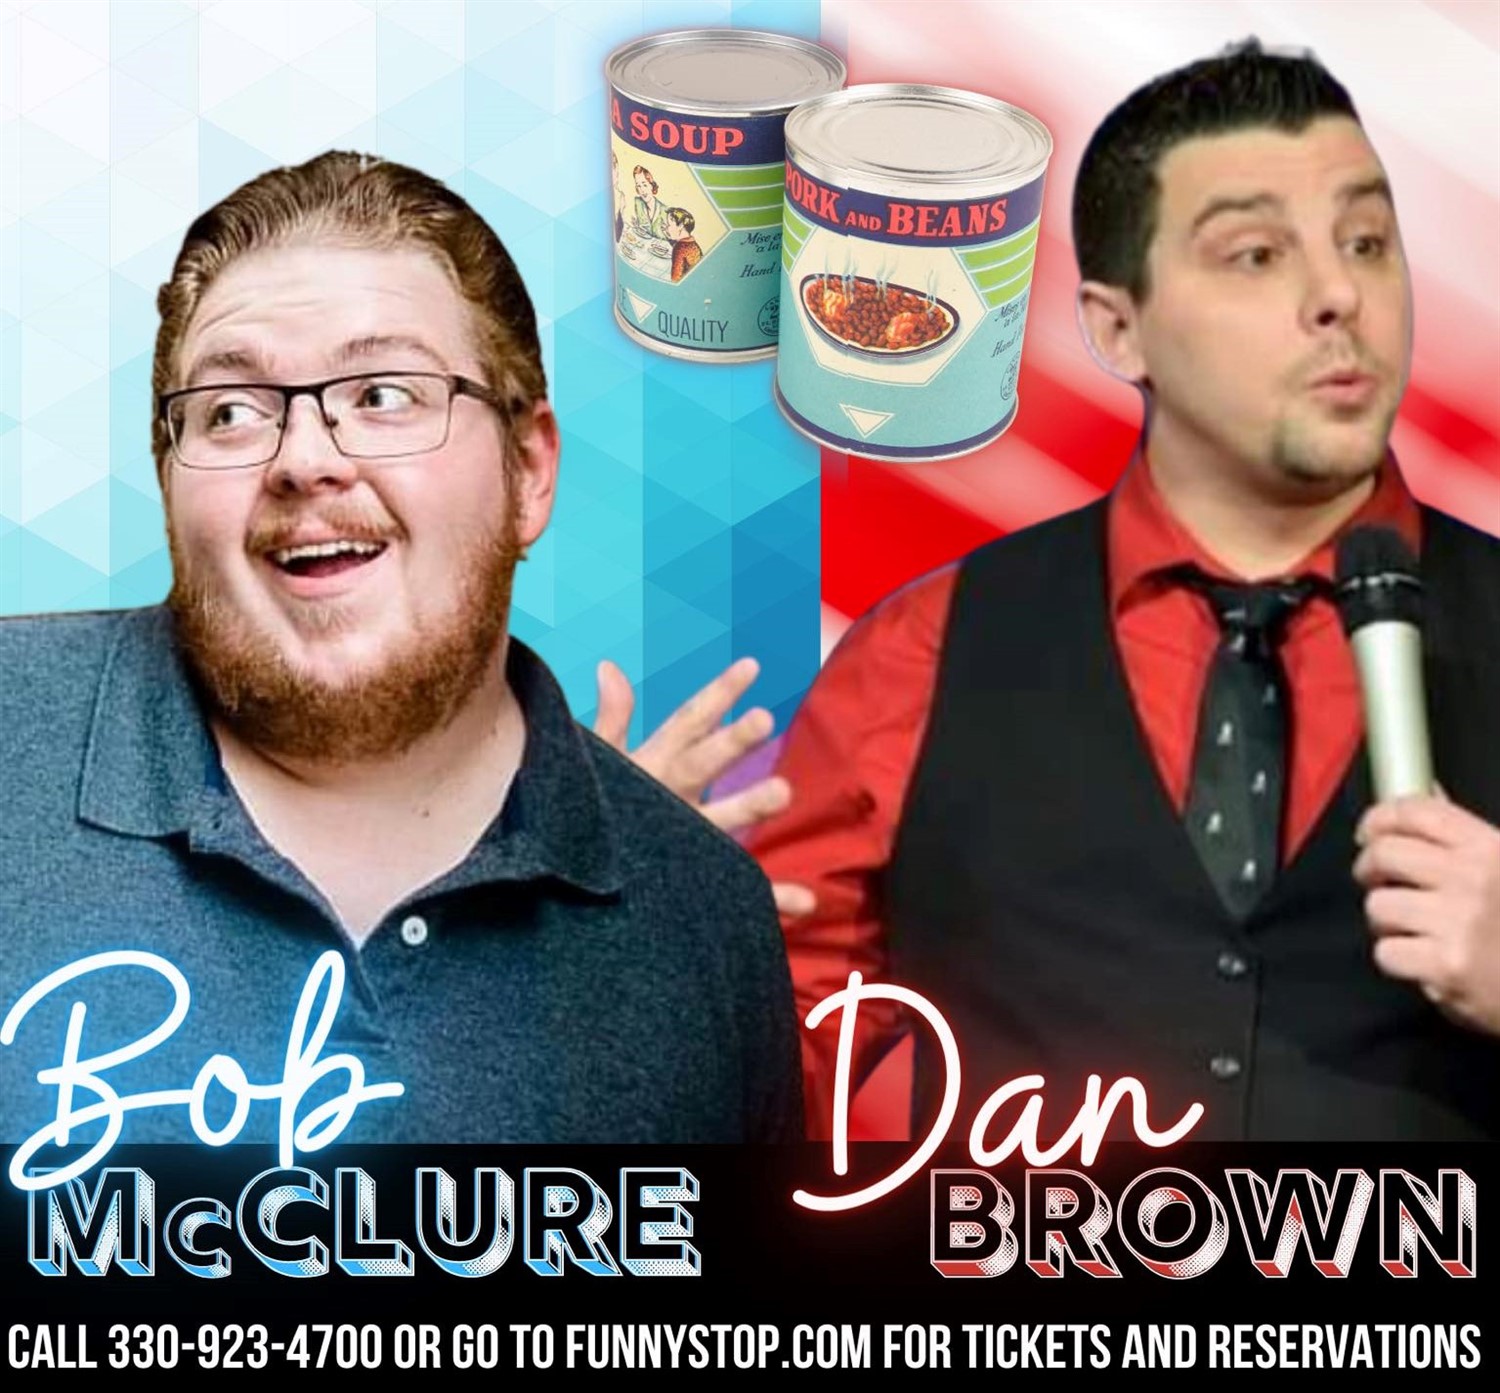 Bob McClure and Dan Brown 8pm show Funny Stop Comedy Club on dic. 15, 20:00@Funny Stop Comedy Club - Buy tickets and Get information on Funny Stop funnystop.online